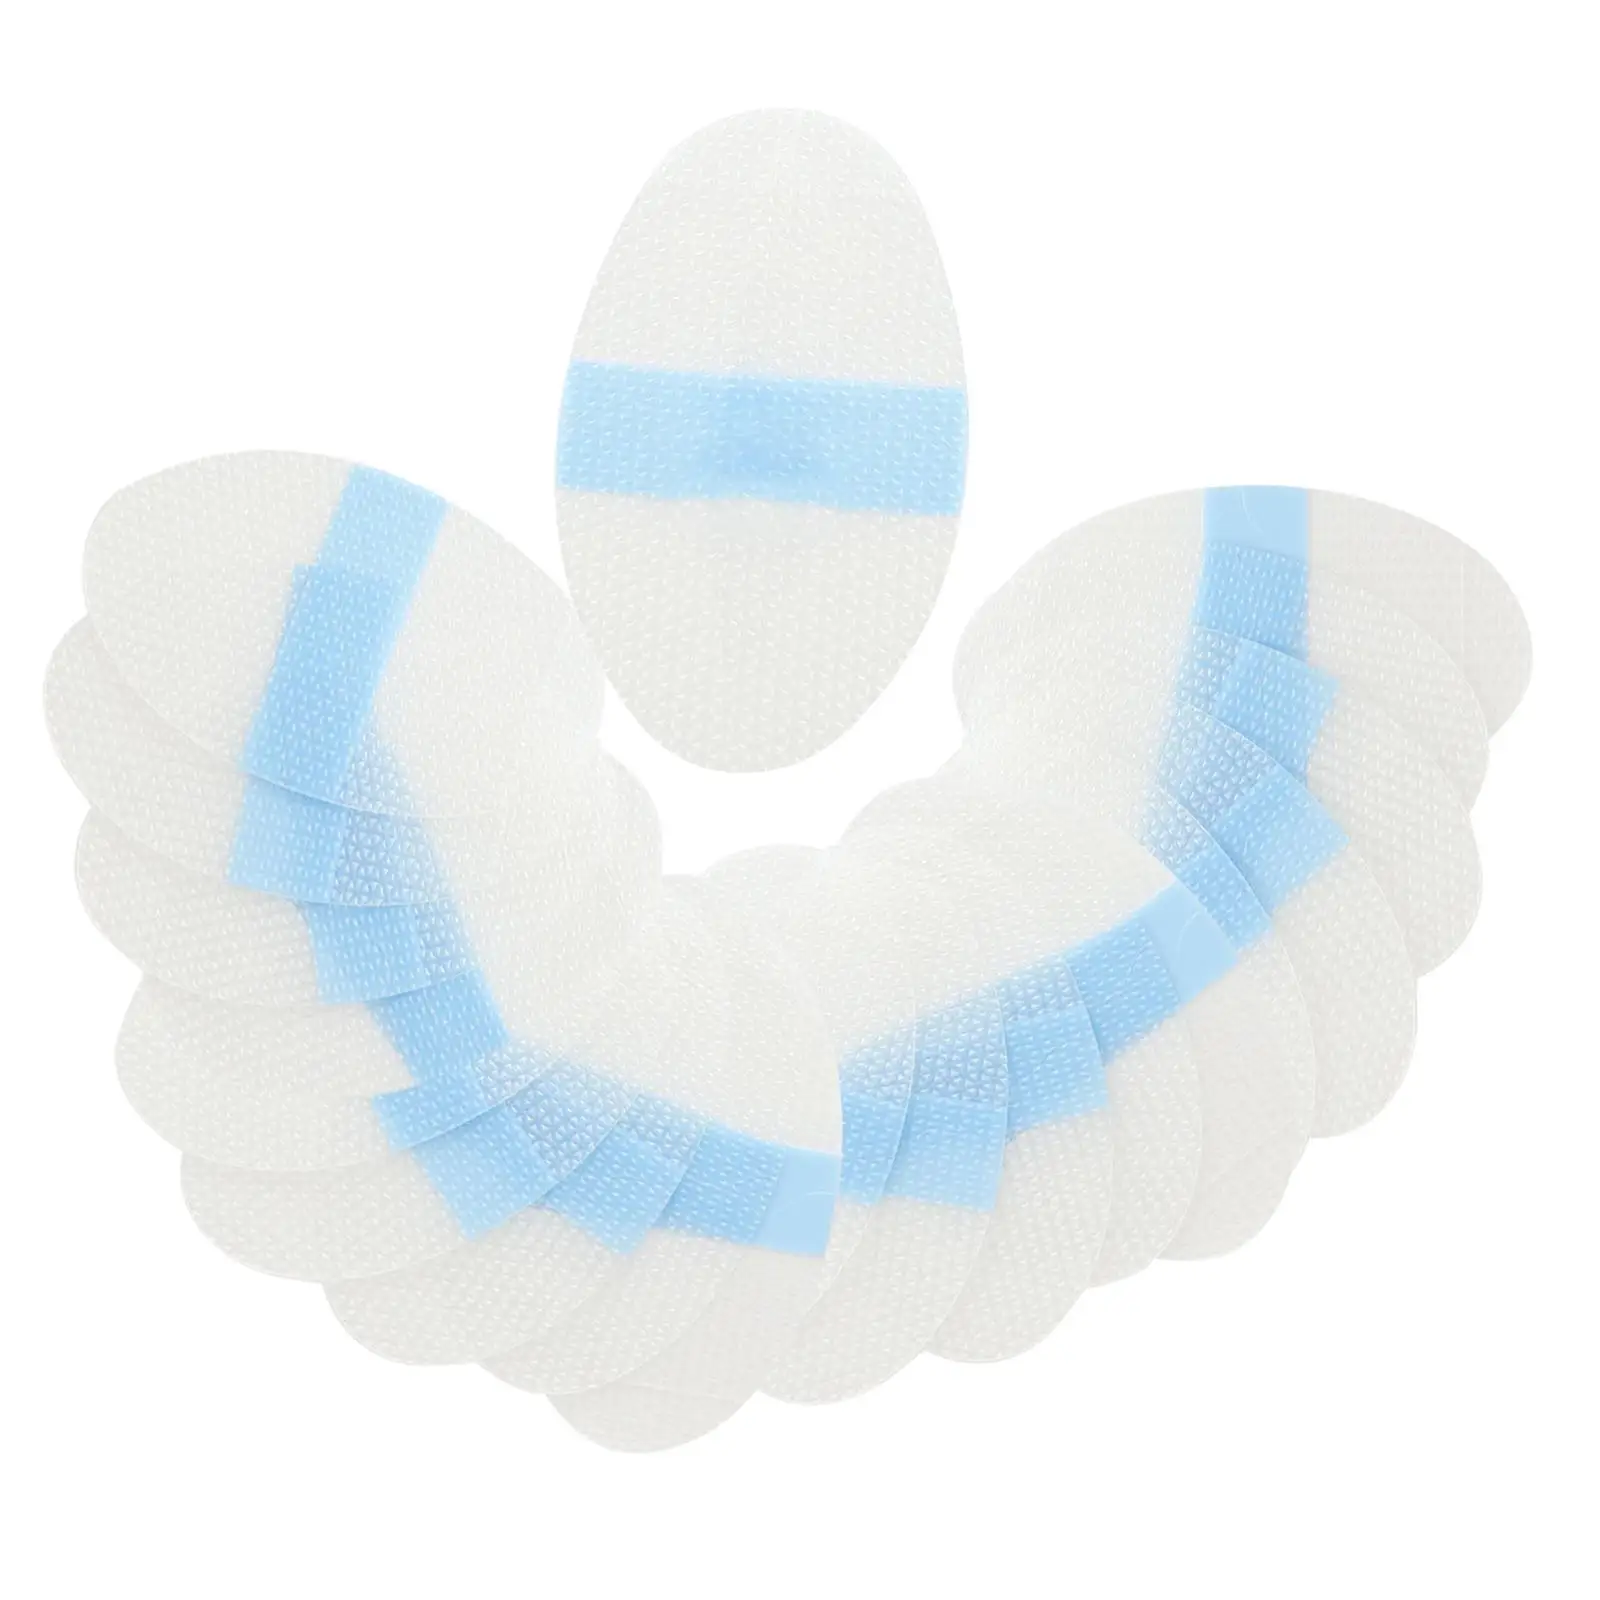 20 Pieces Waterproof Ear Stickers Ear Covers ear Protectors for Shower Swimming Water Adults Children